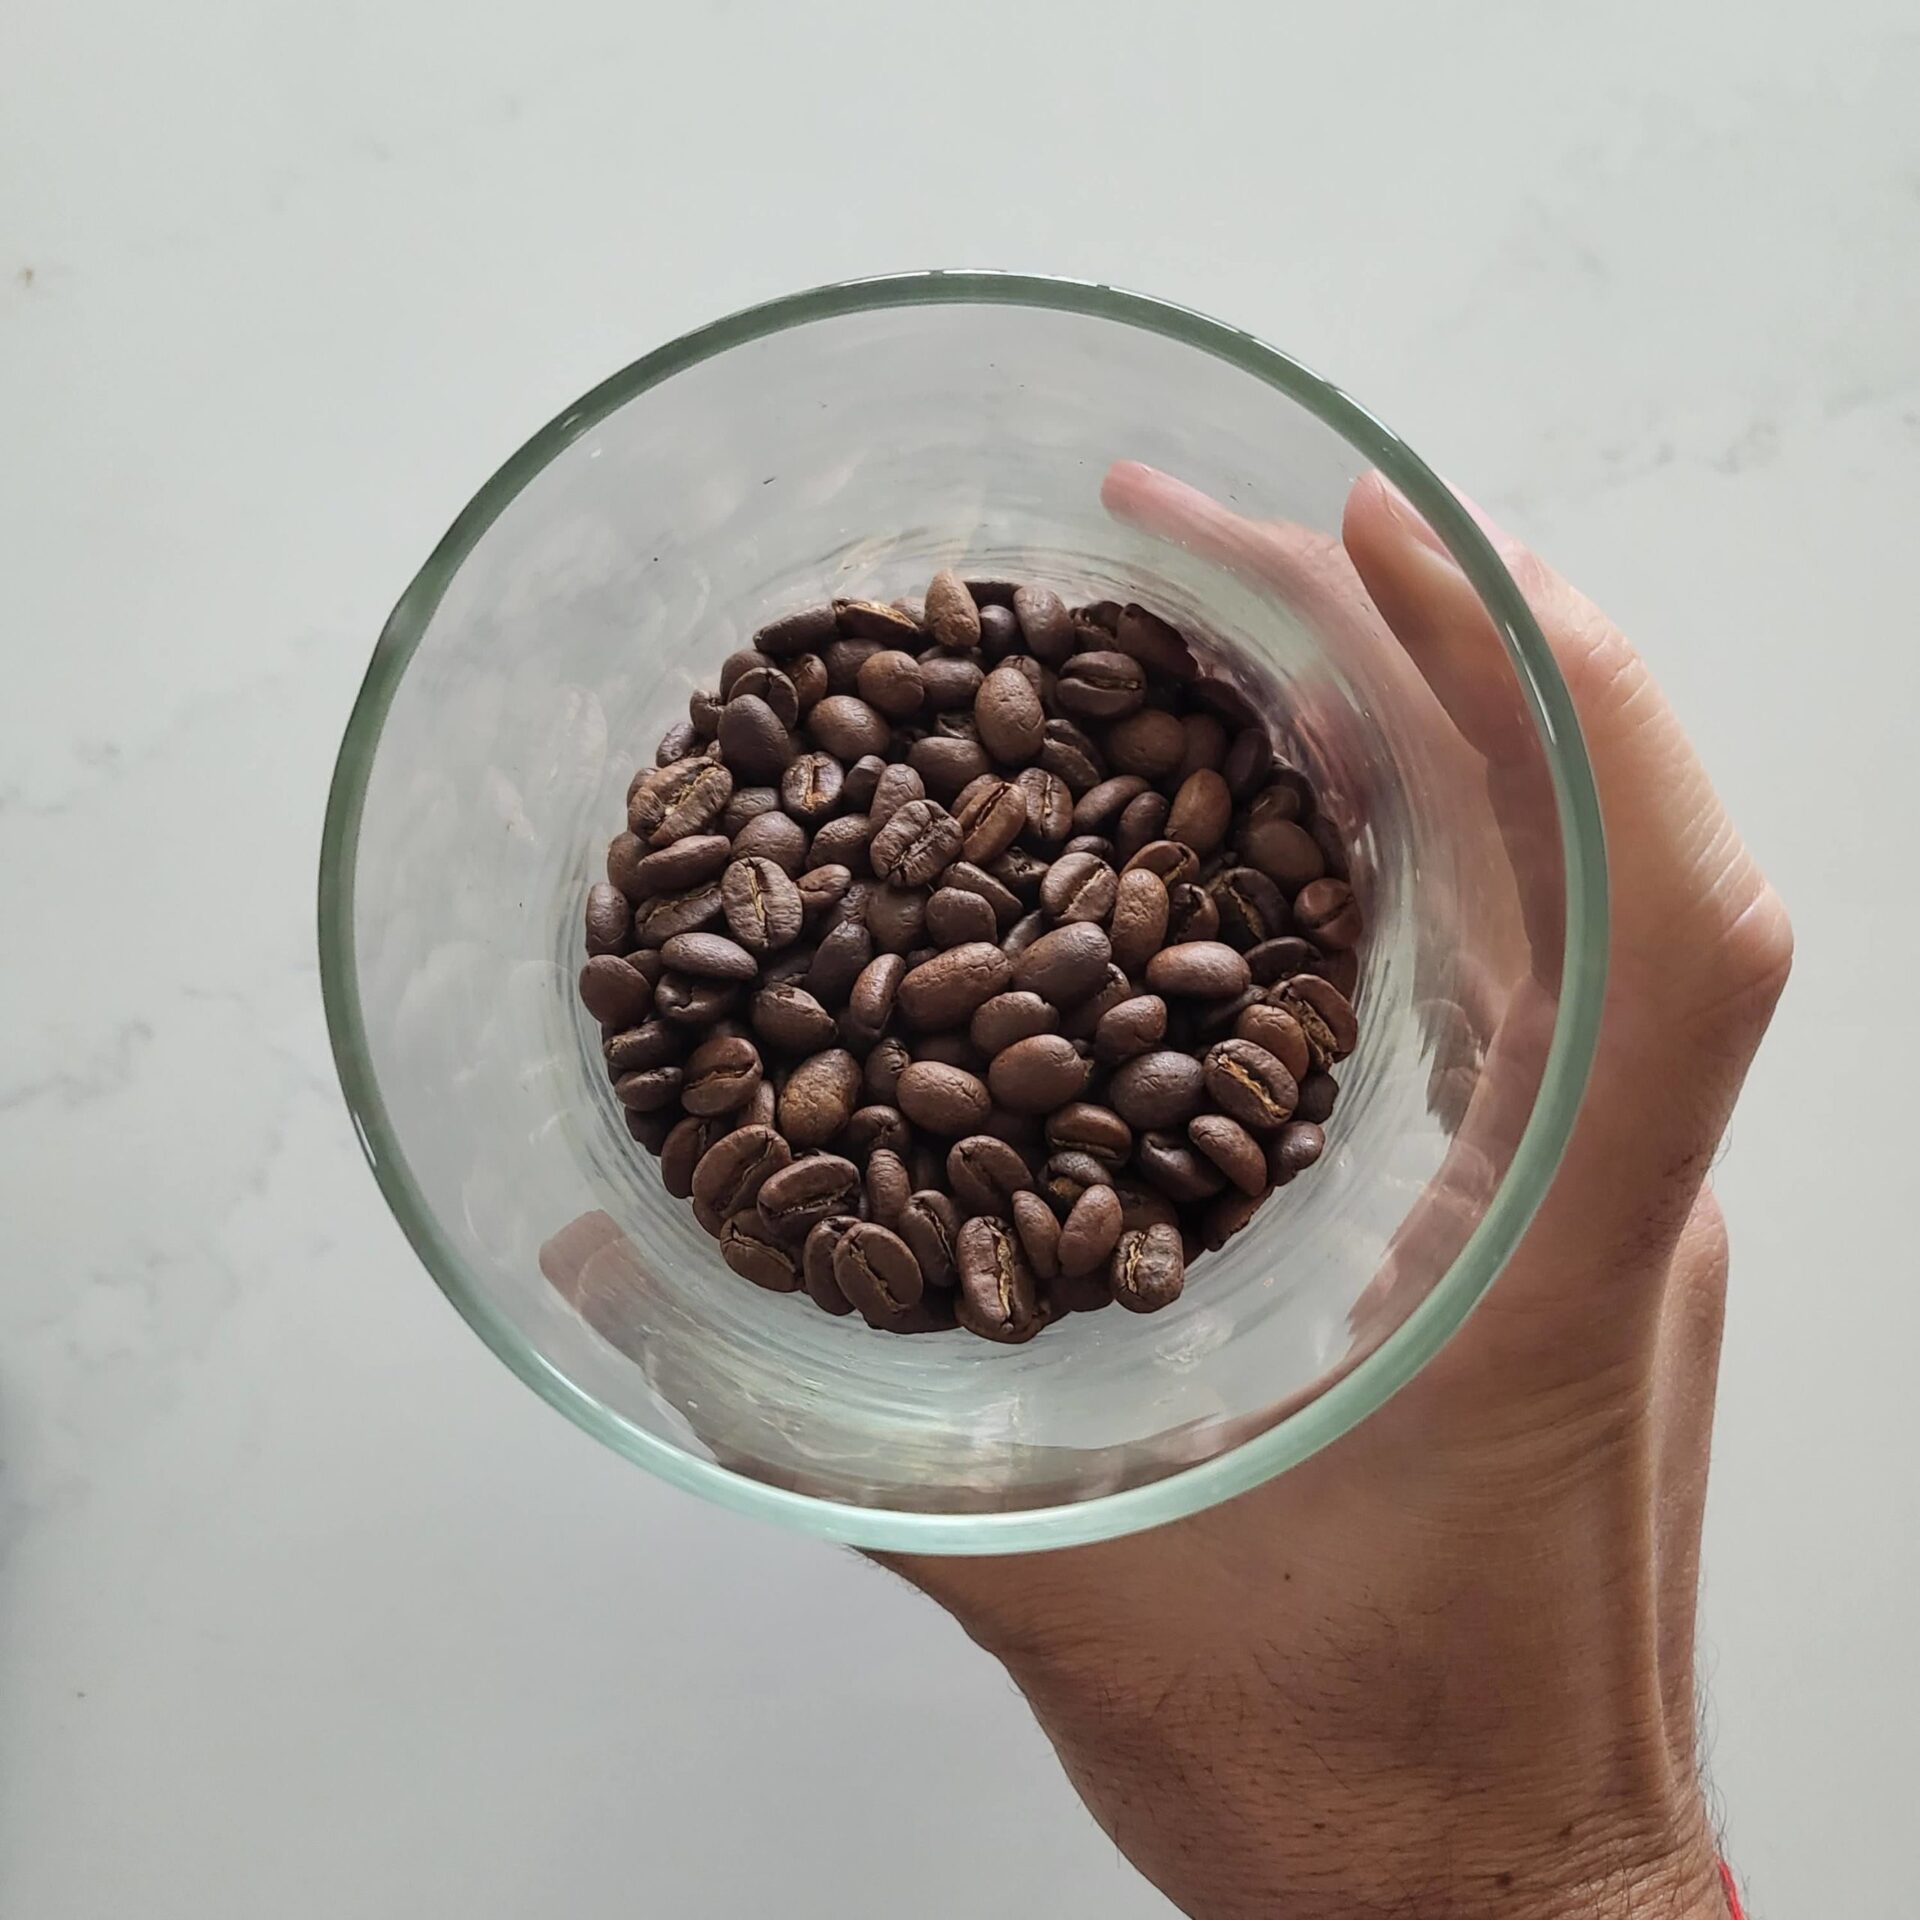 Whole coffee beans in a glass jar.